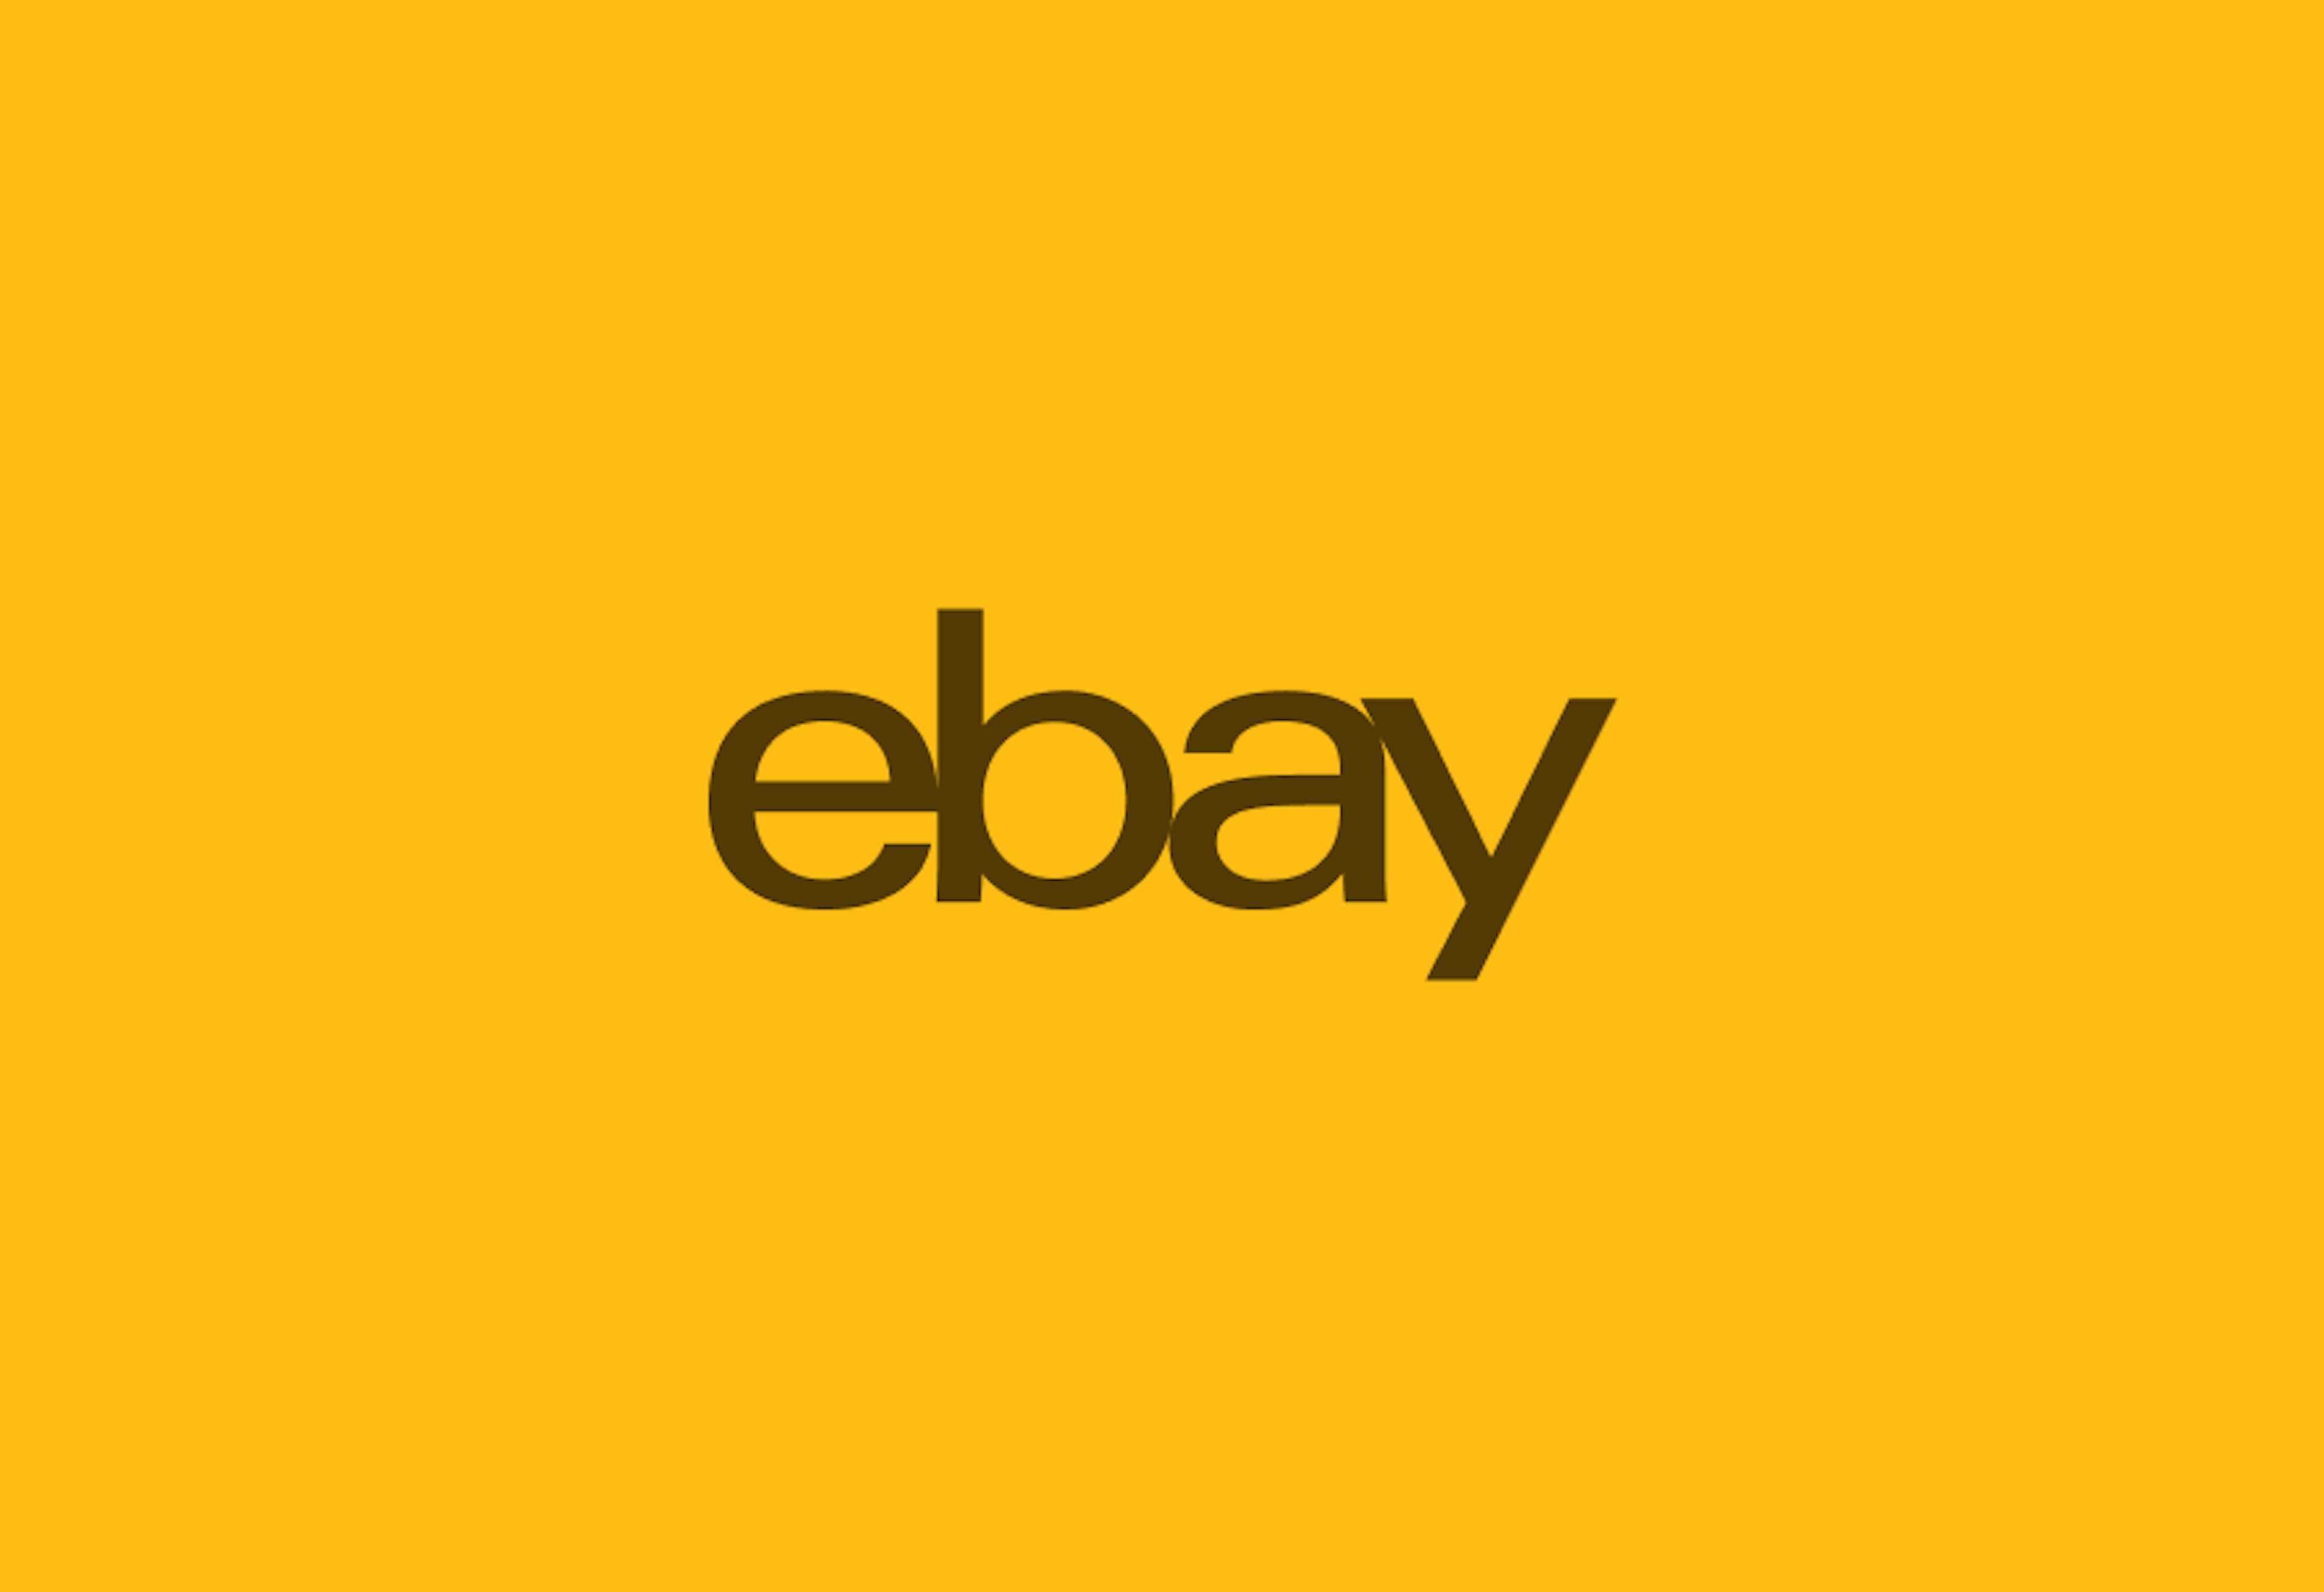 A yellow tone-on-tone combination of a dark brown logo on a vibrant yellow background.